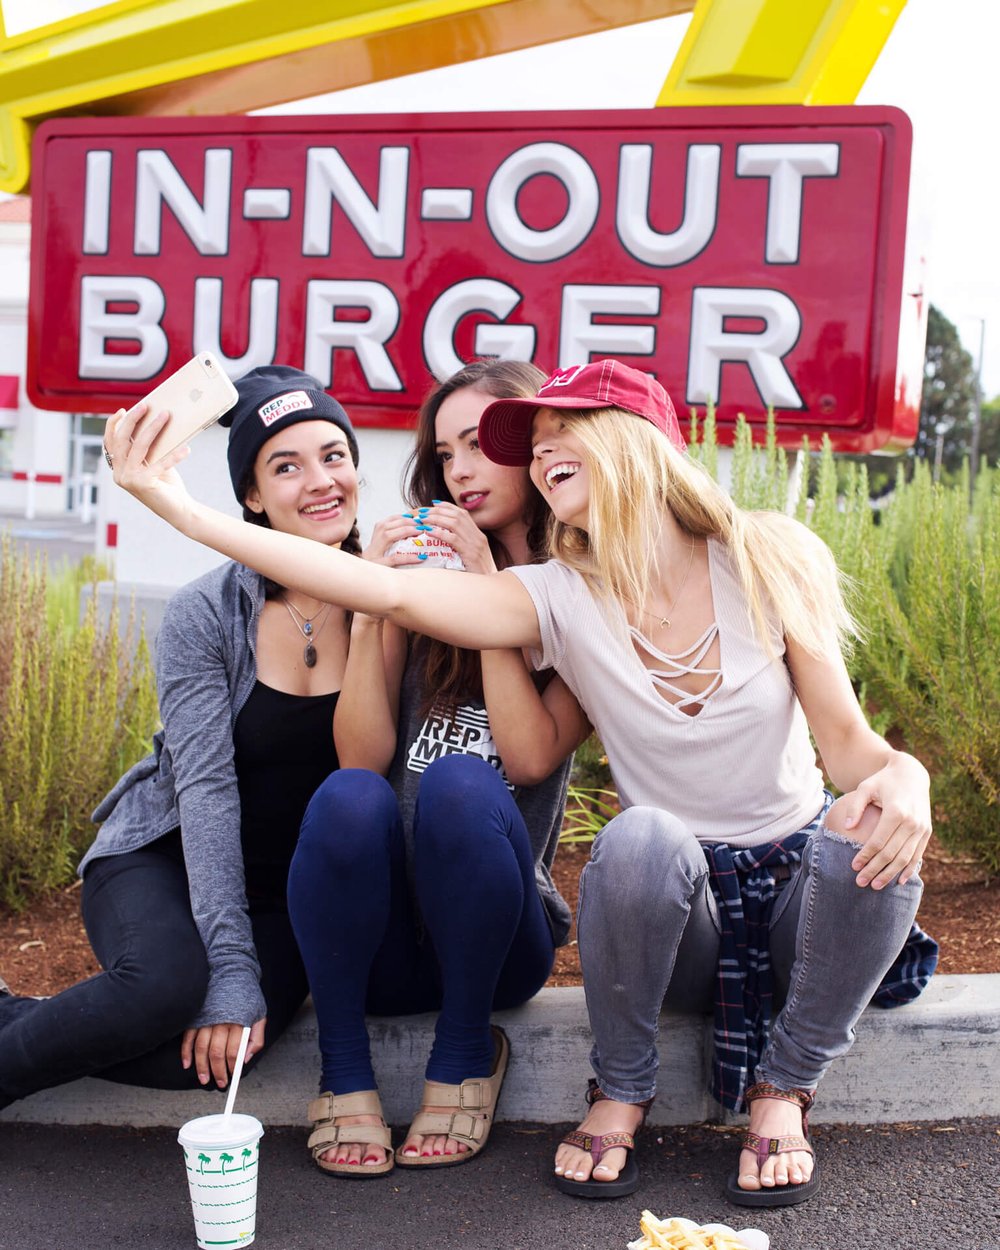 three girls wearing rep meddy take selfie in front of in n out burger sign